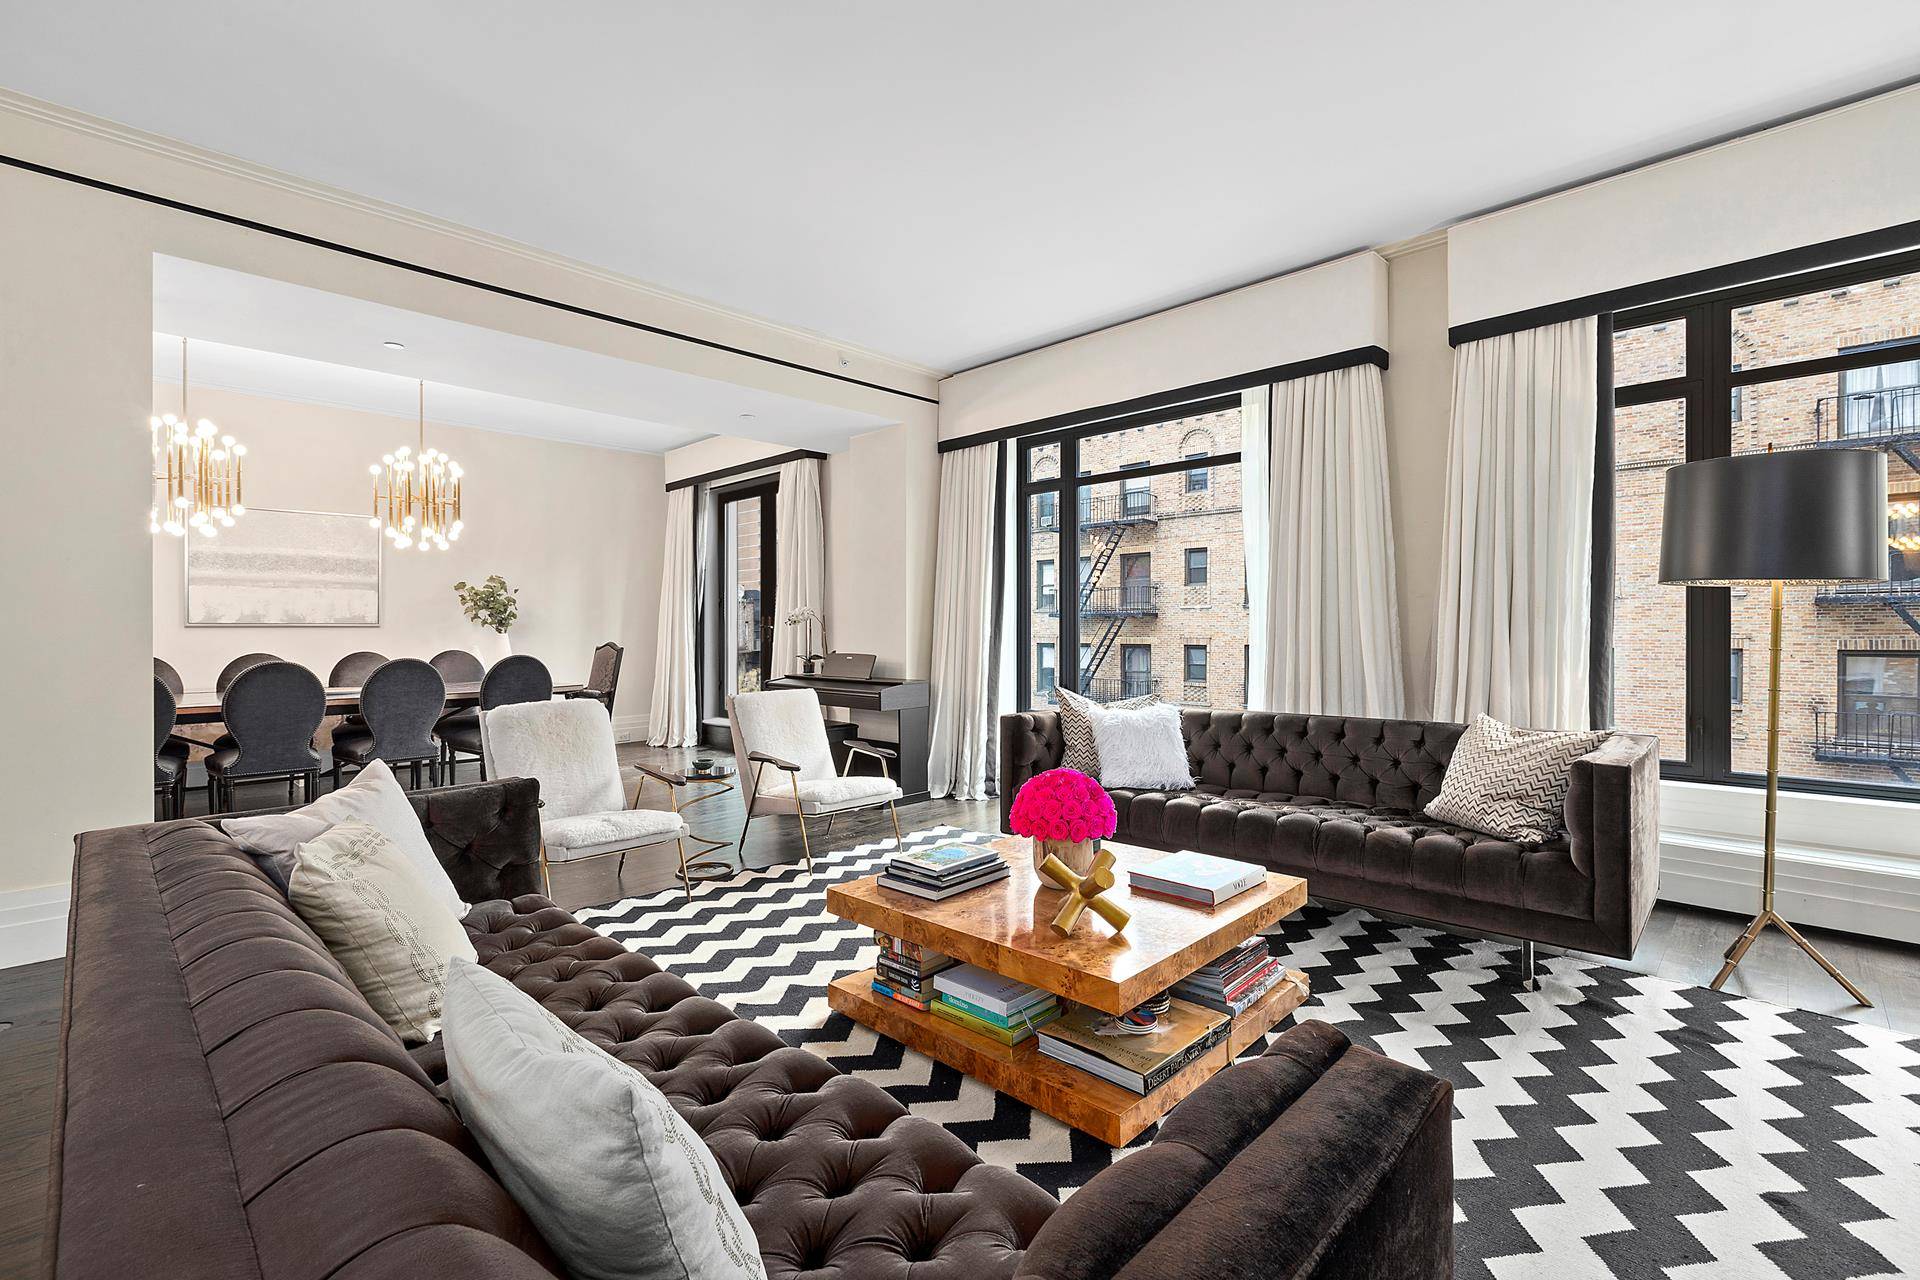 Elegant private full floor four bedroom condominium with twenty four hour doorman in former mansion moments from Park Avenue in coveted Carnegie Hill.